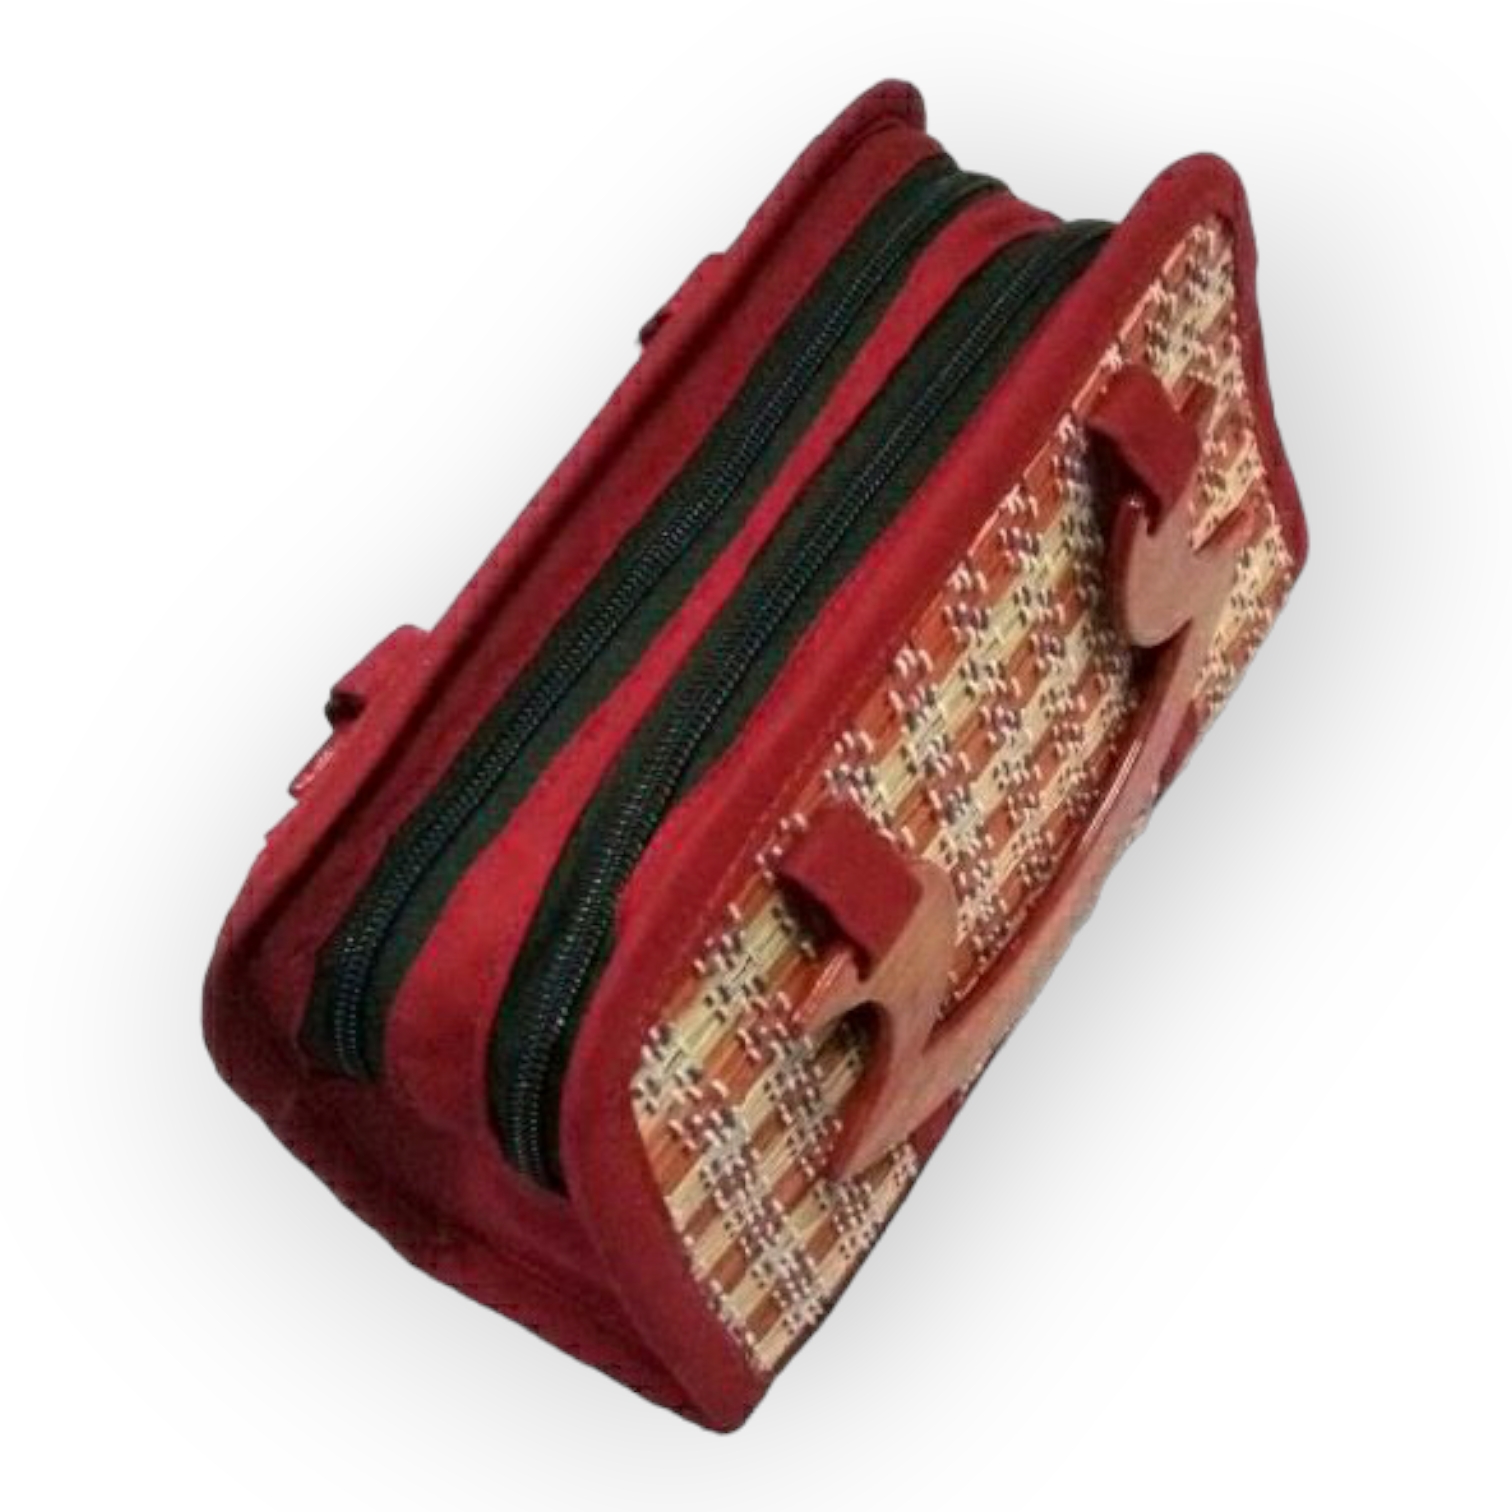 Madur Kathi Cosmetic Bag in Maroon Colour - 0